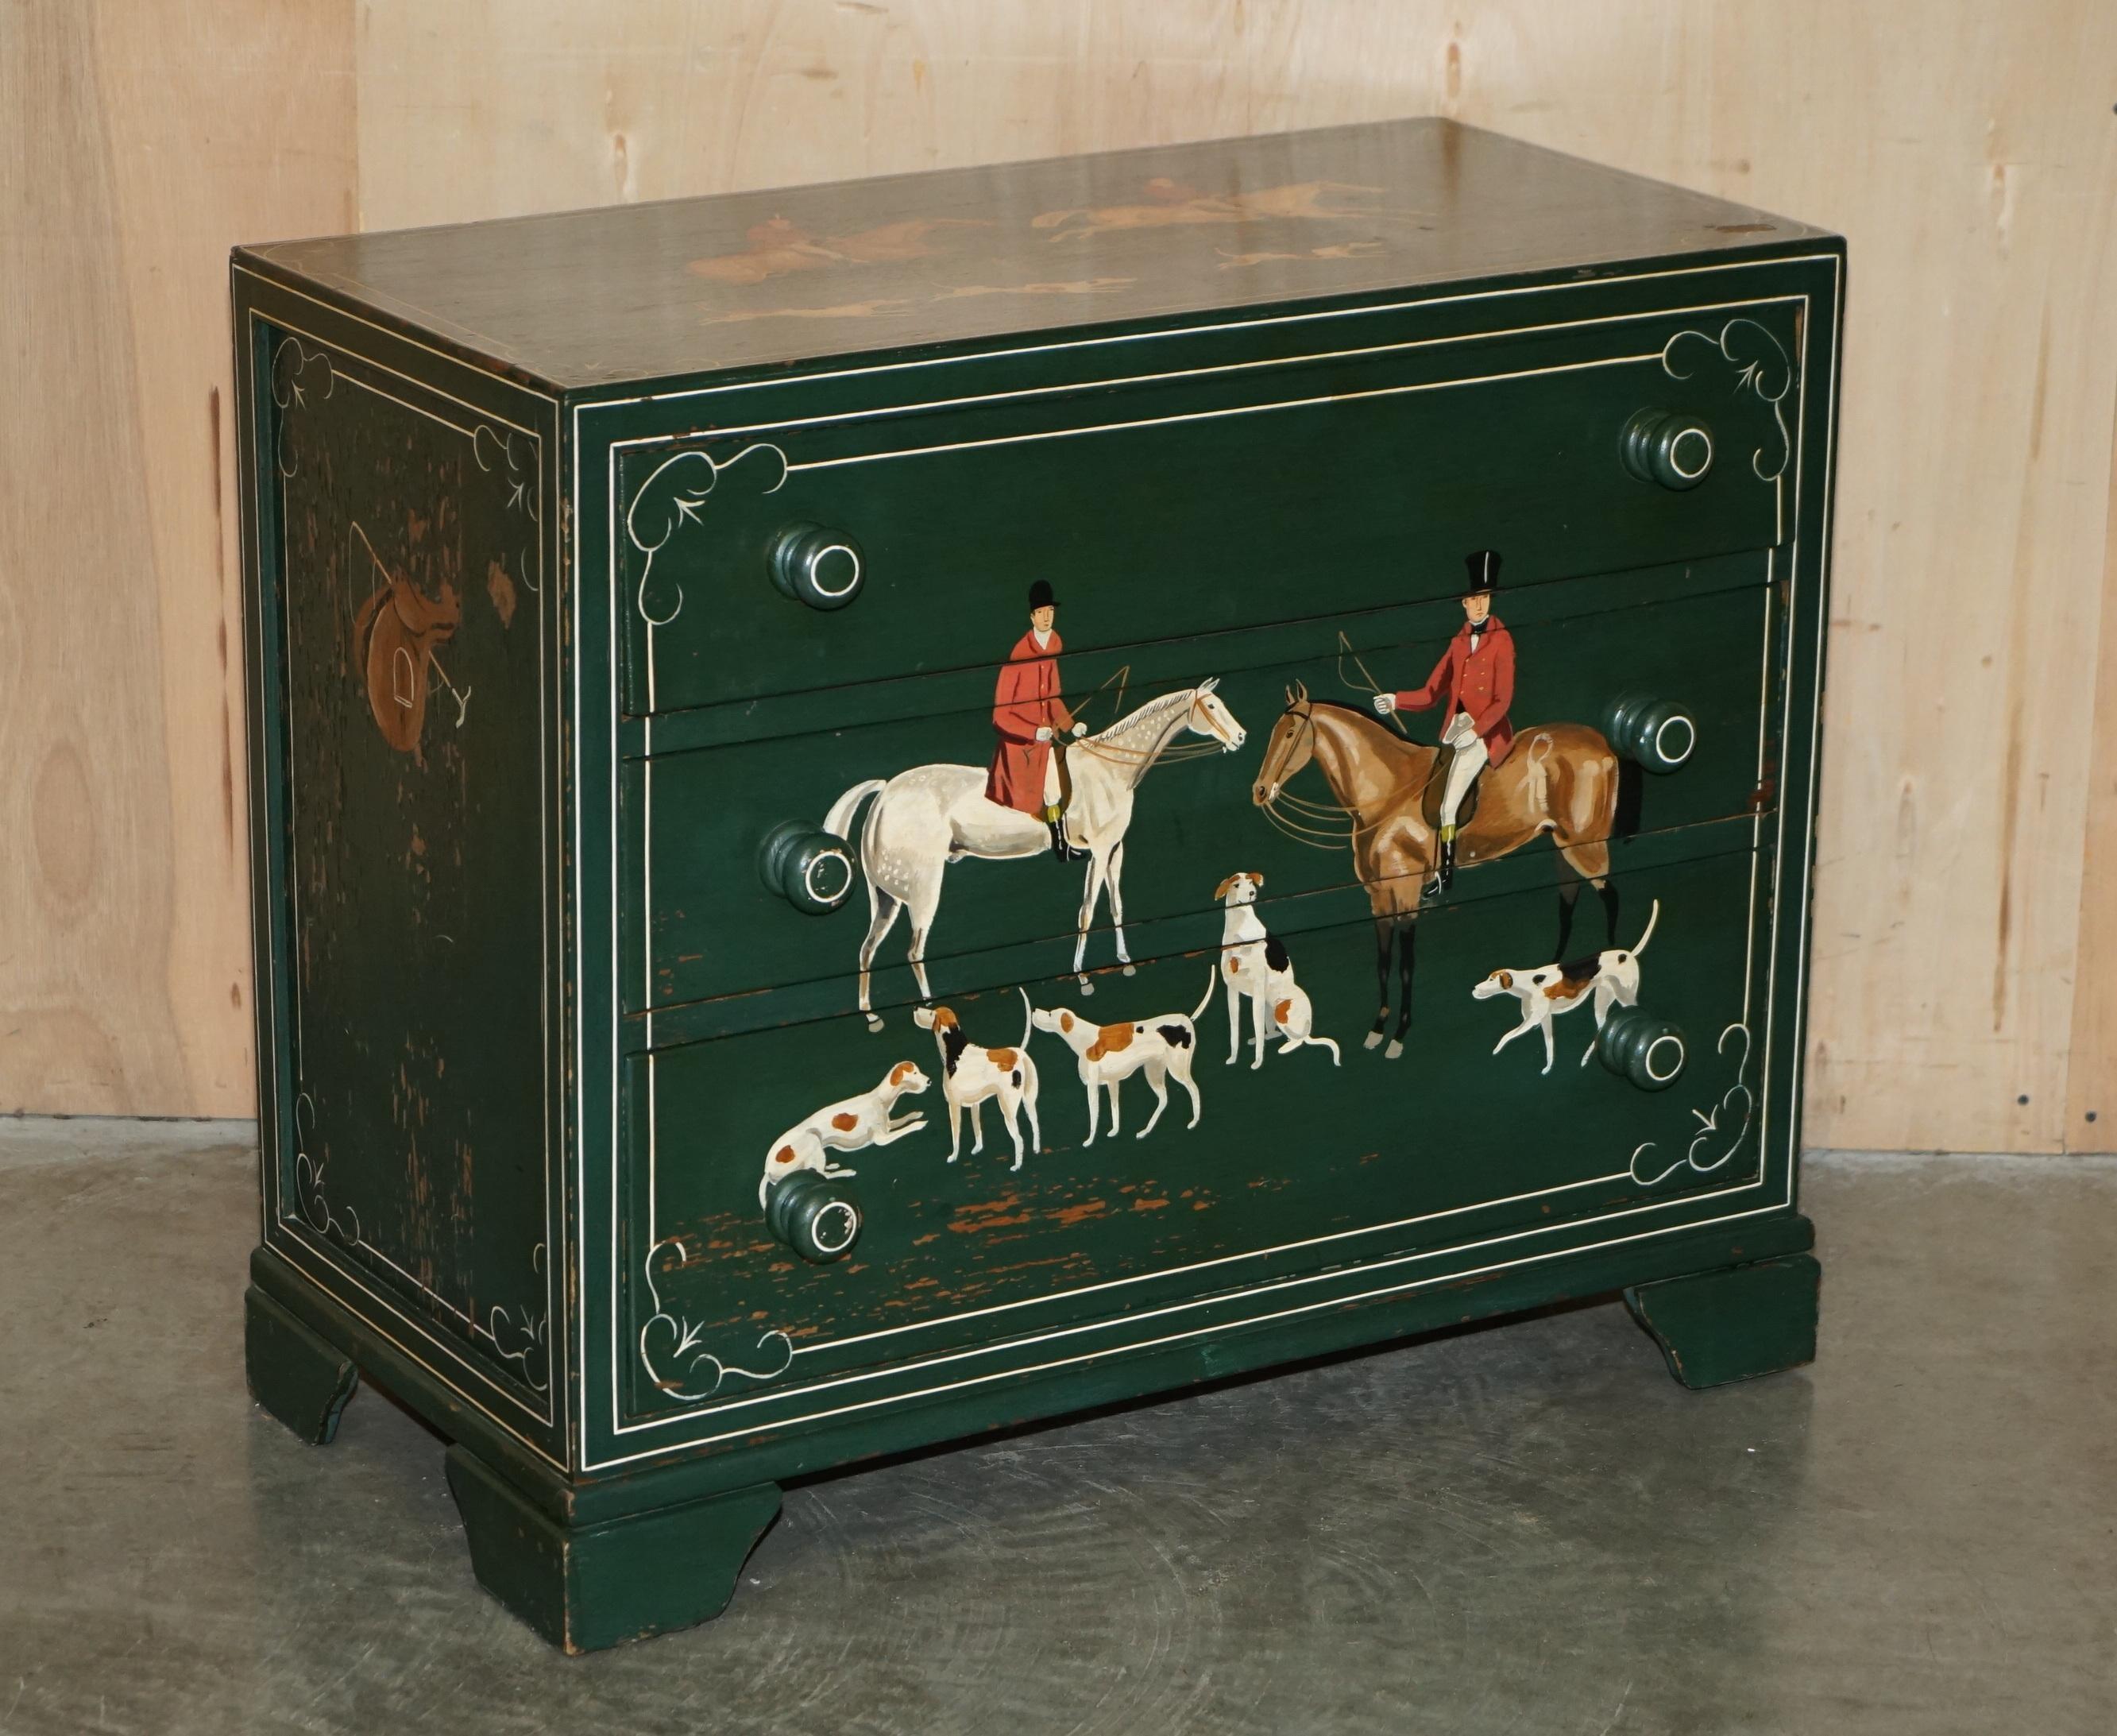 Royal House Antiques

Royal House Antiques is delighted to offer for sale this stunning original circa 1900 hand painted chest of drawers depicting rather noble looking horses with their riders

Please note the delivery fee listed is just a guide,